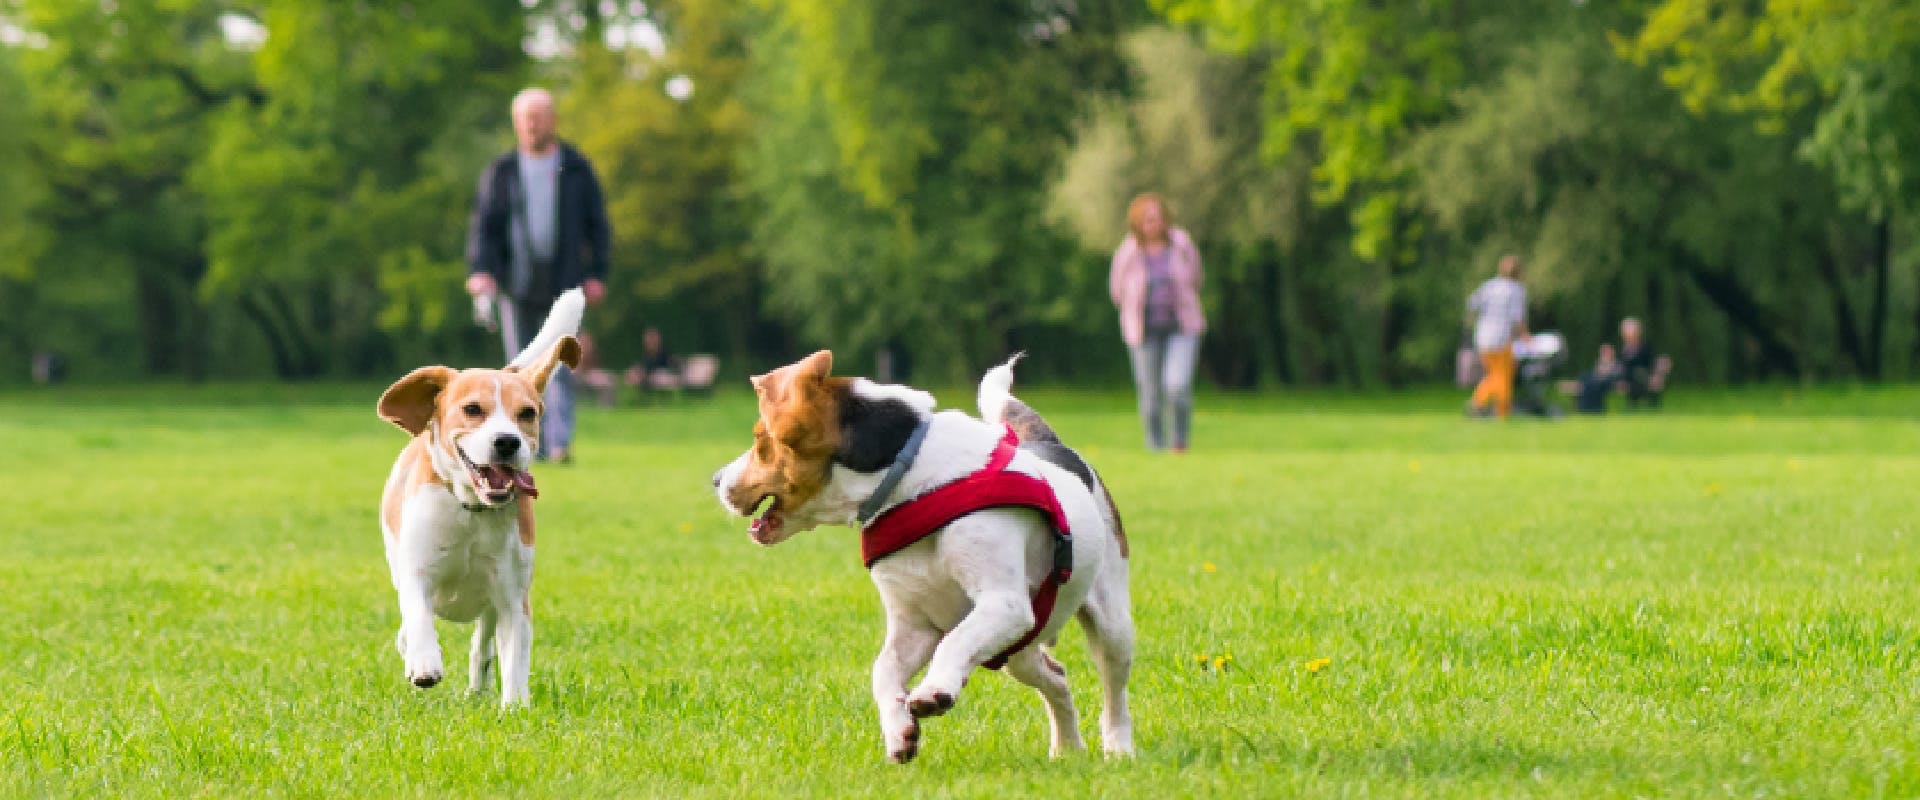 Two Beagles play in a park.